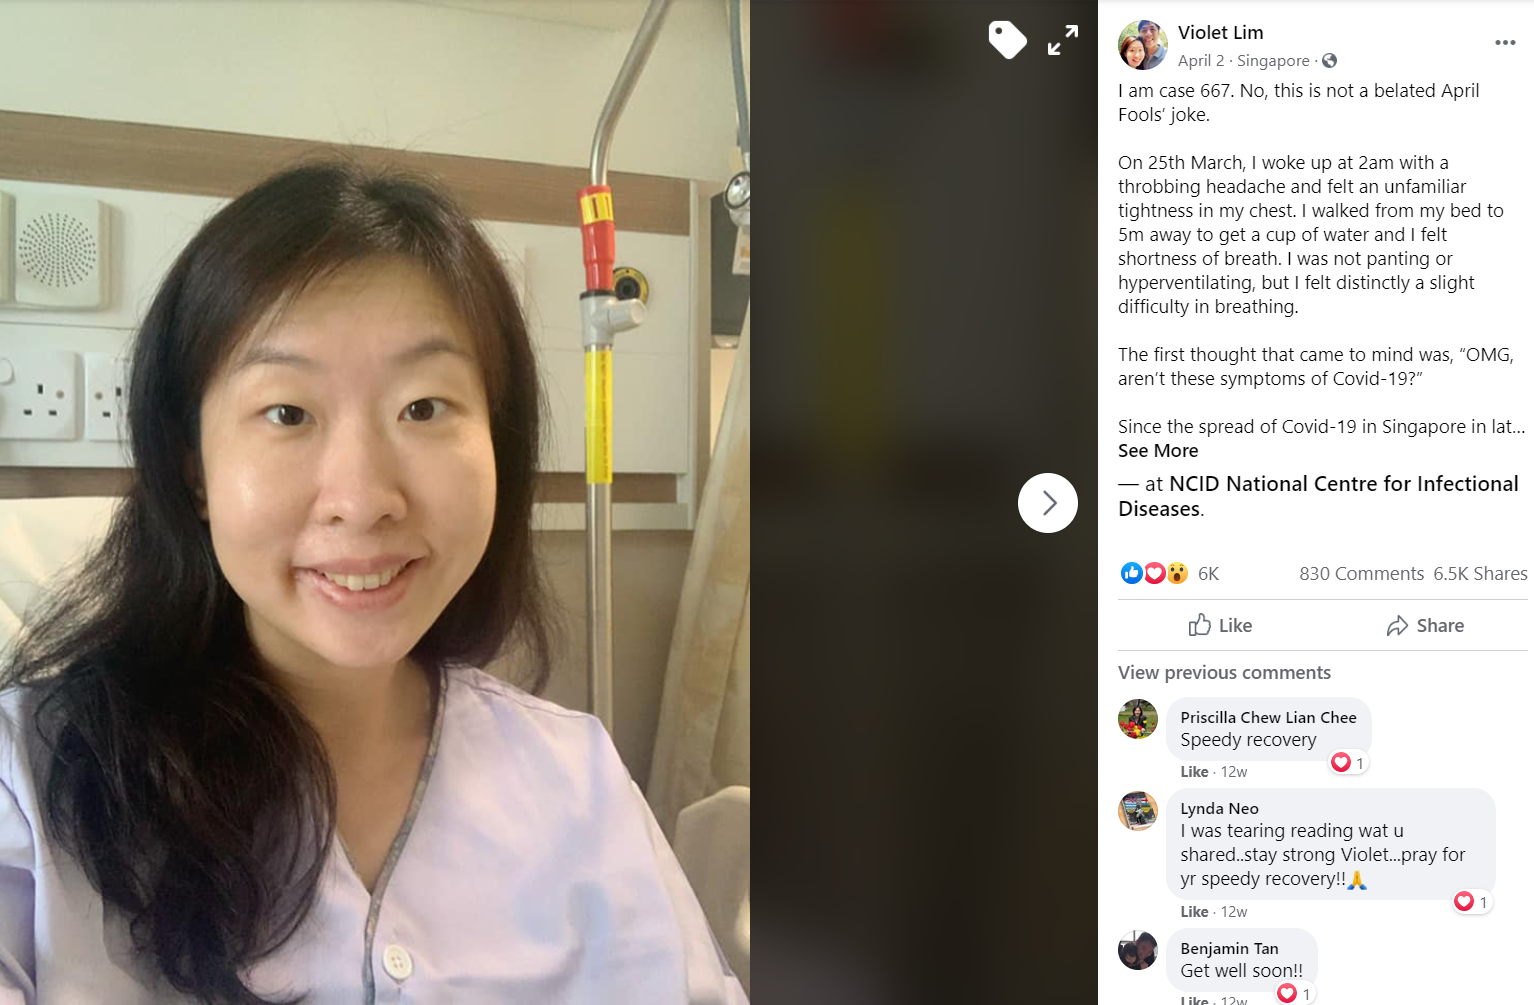 Violet Lim sharing on Facebook her COVID-19 infection journey. Photo from Violet Lim’s Facebook account.